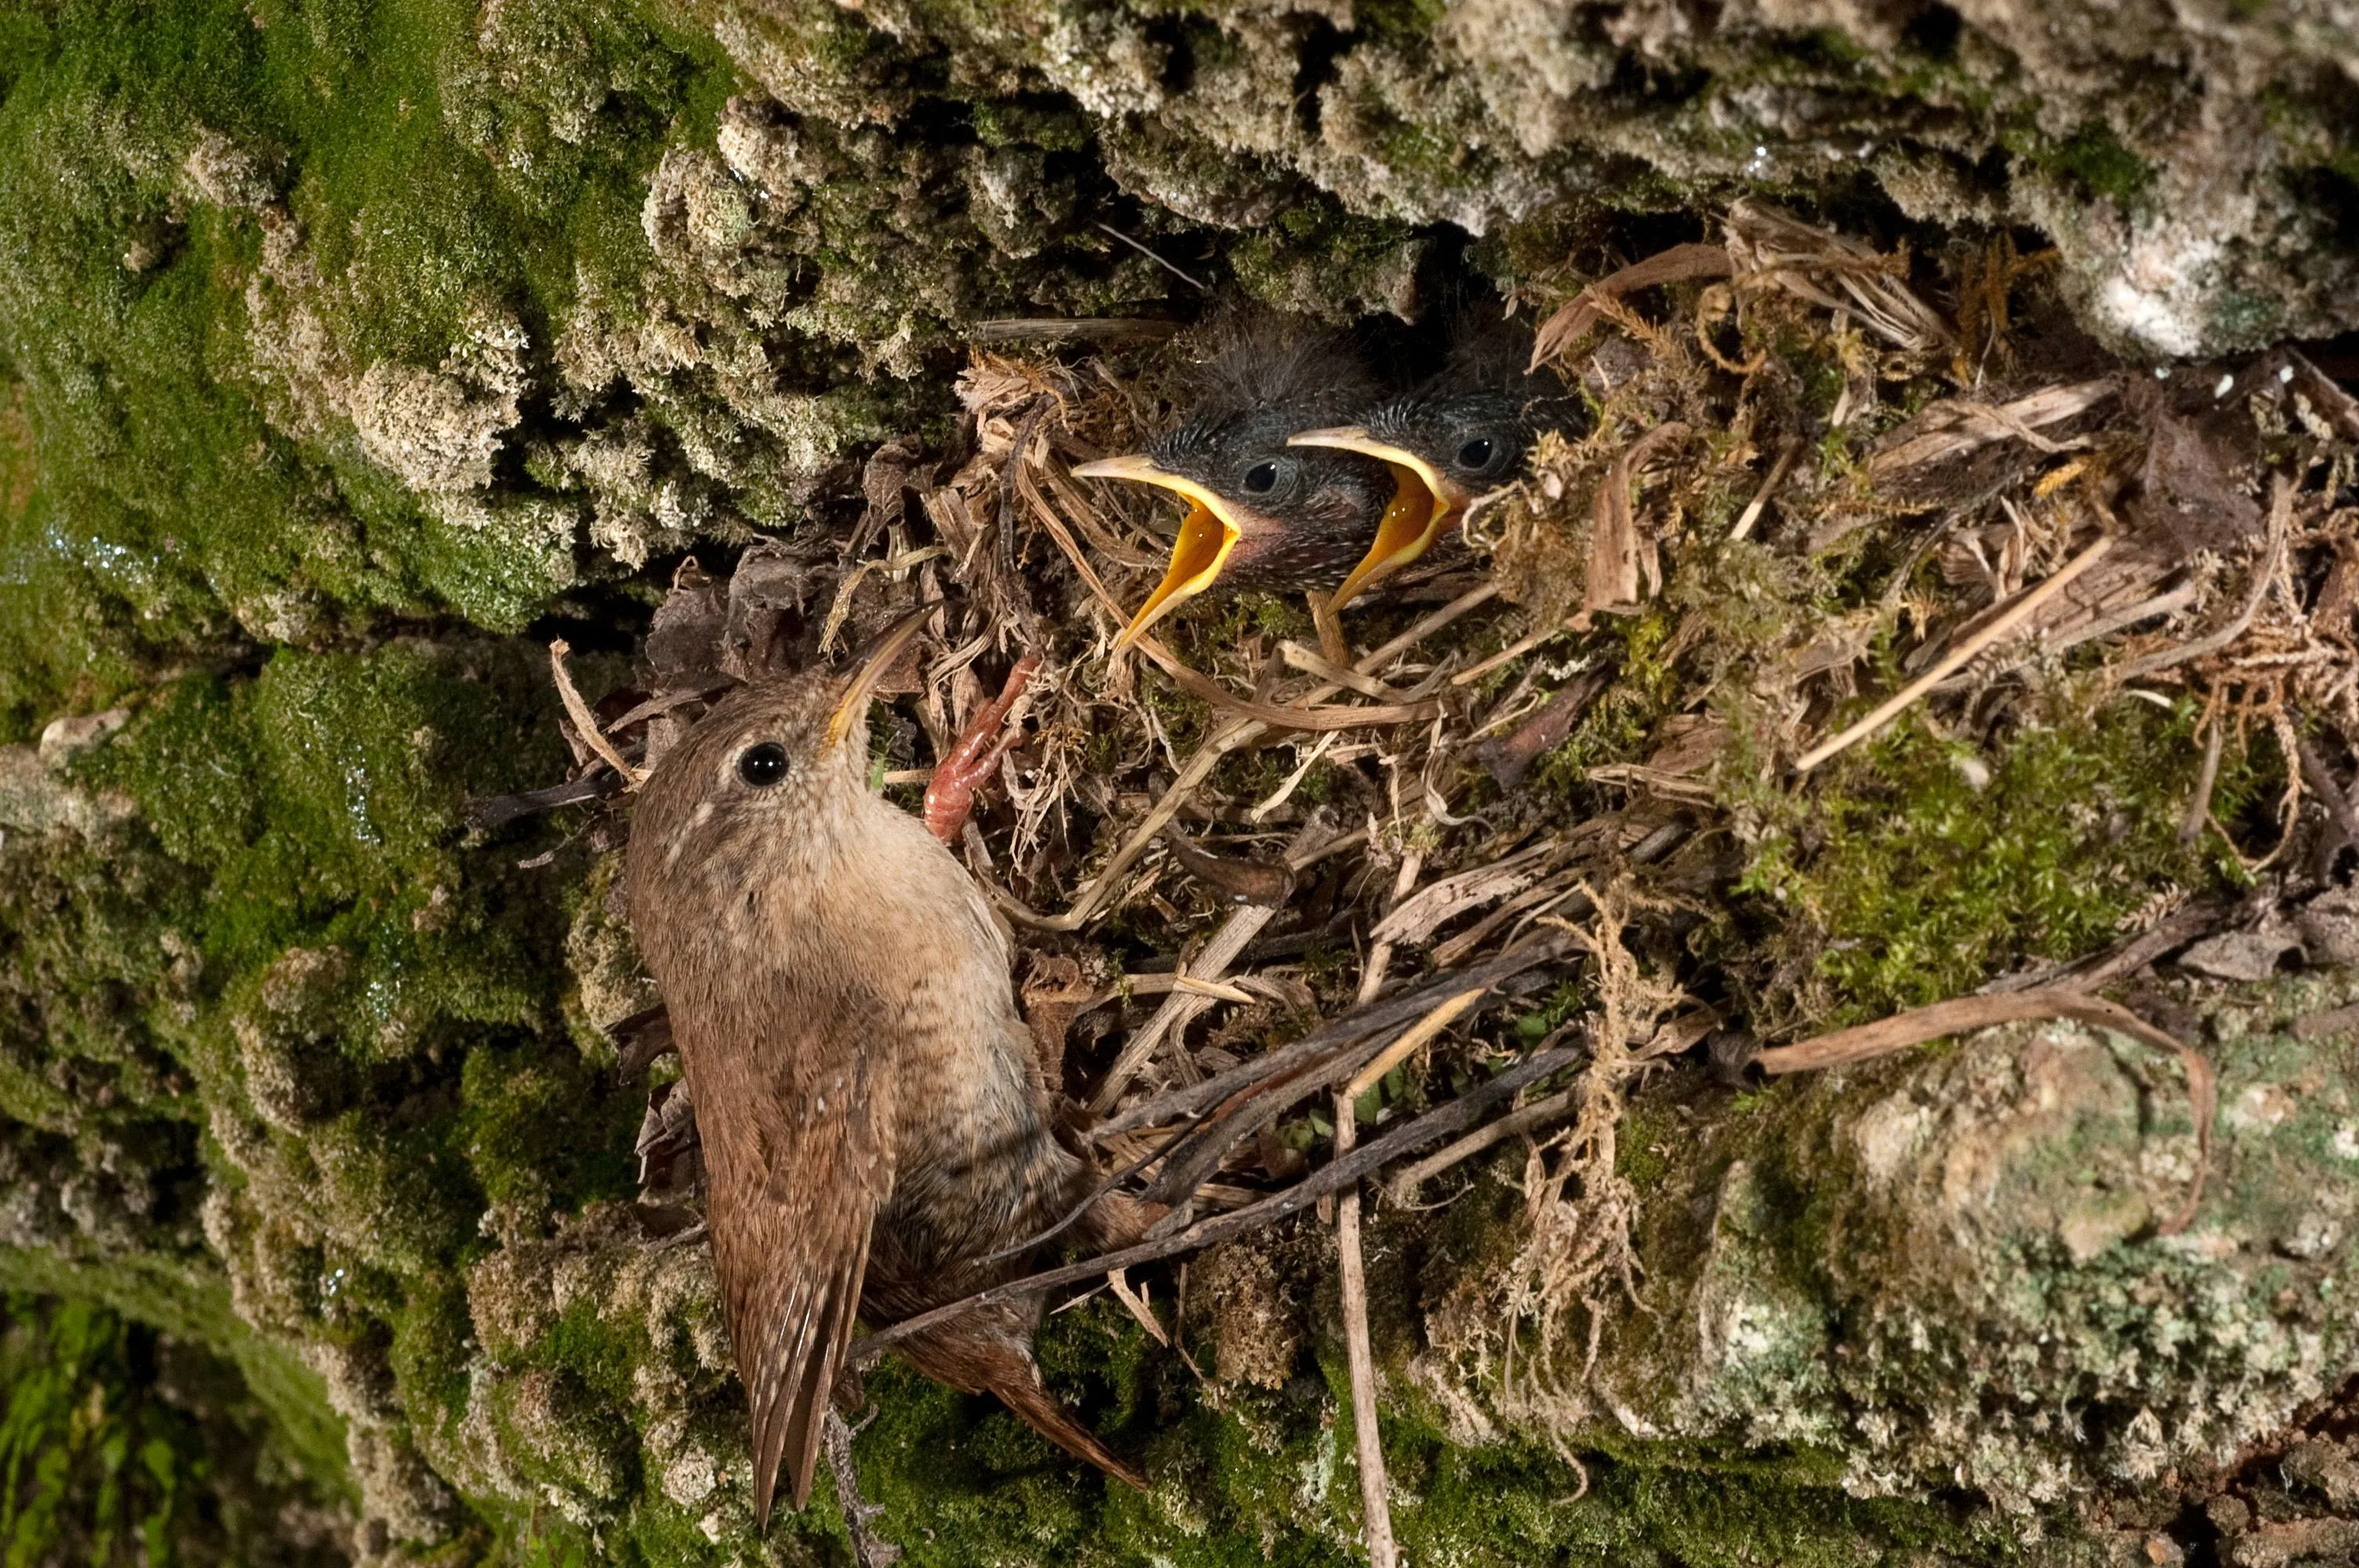 two chicks open their beaks wide to be fed by their mother at their nest built into the rock.